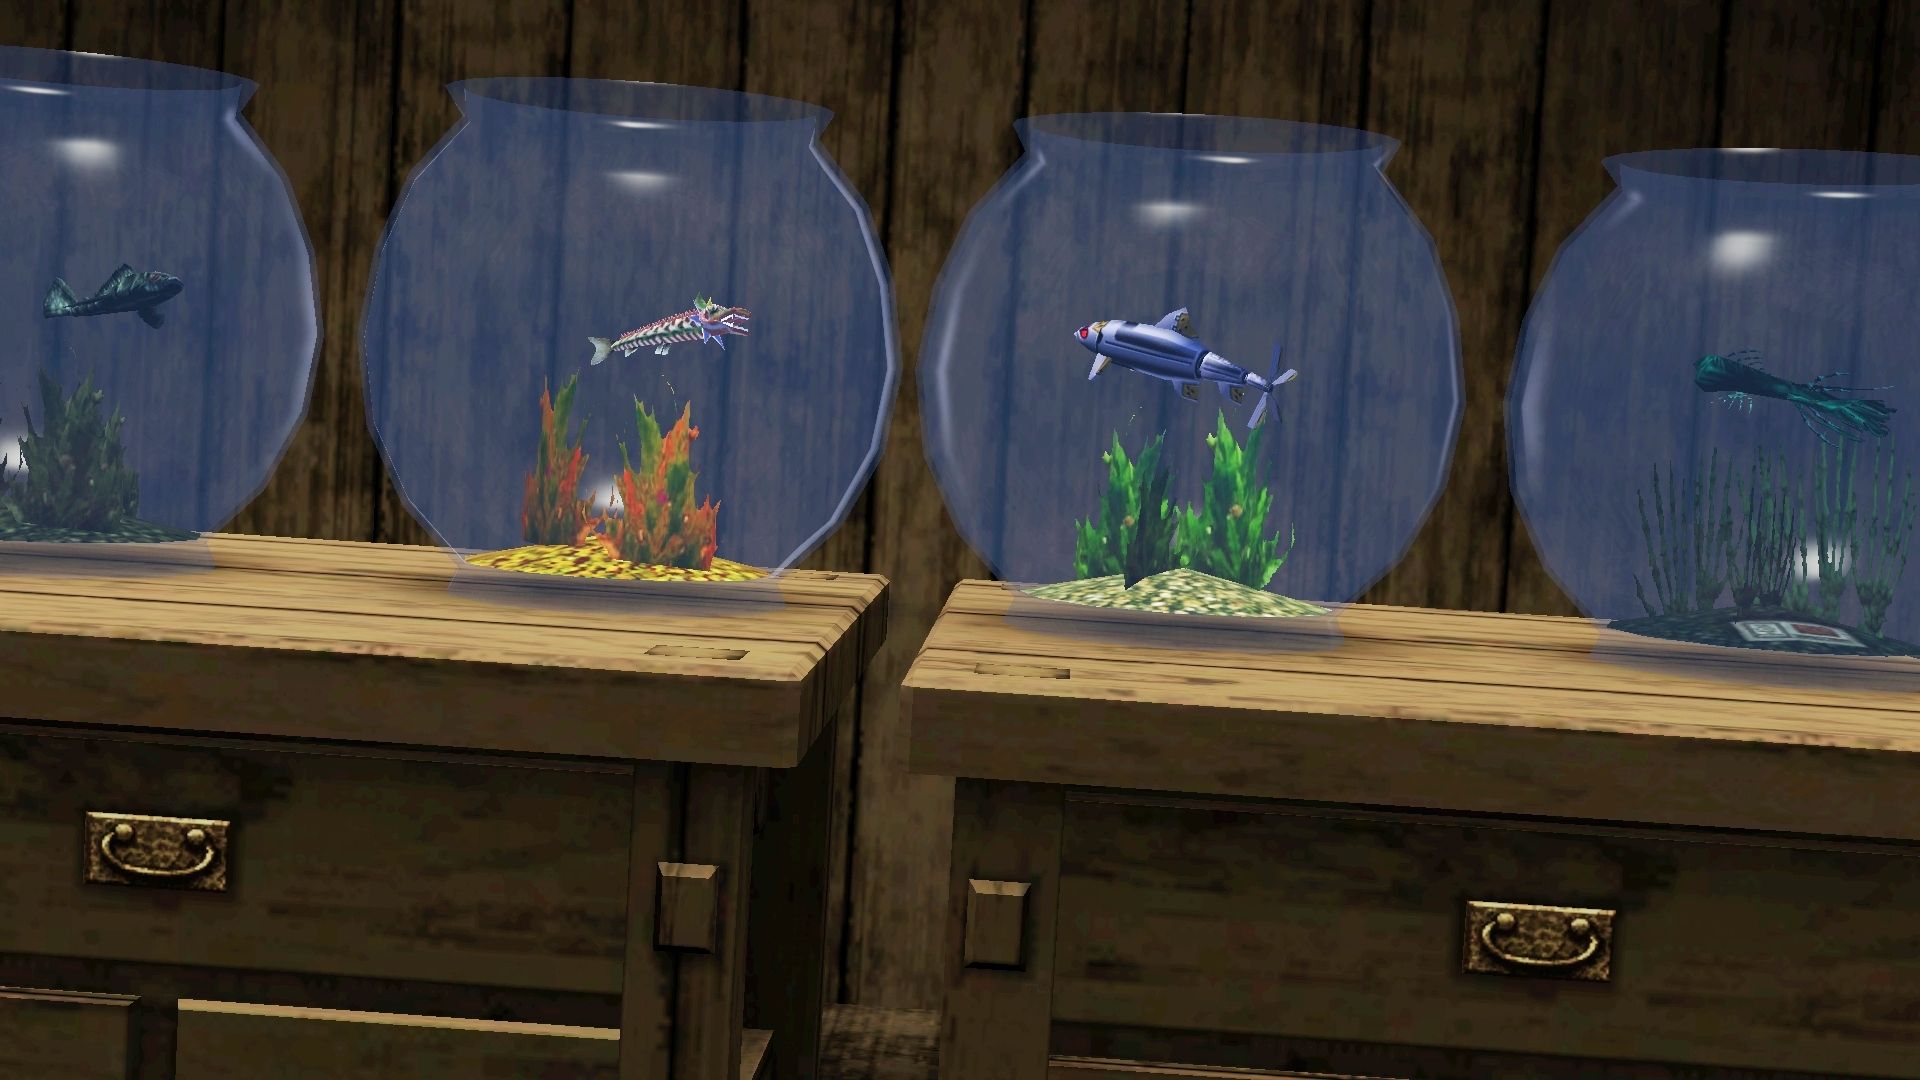 fishbowls.jpg?width=1920&height=1080&fit=bounds